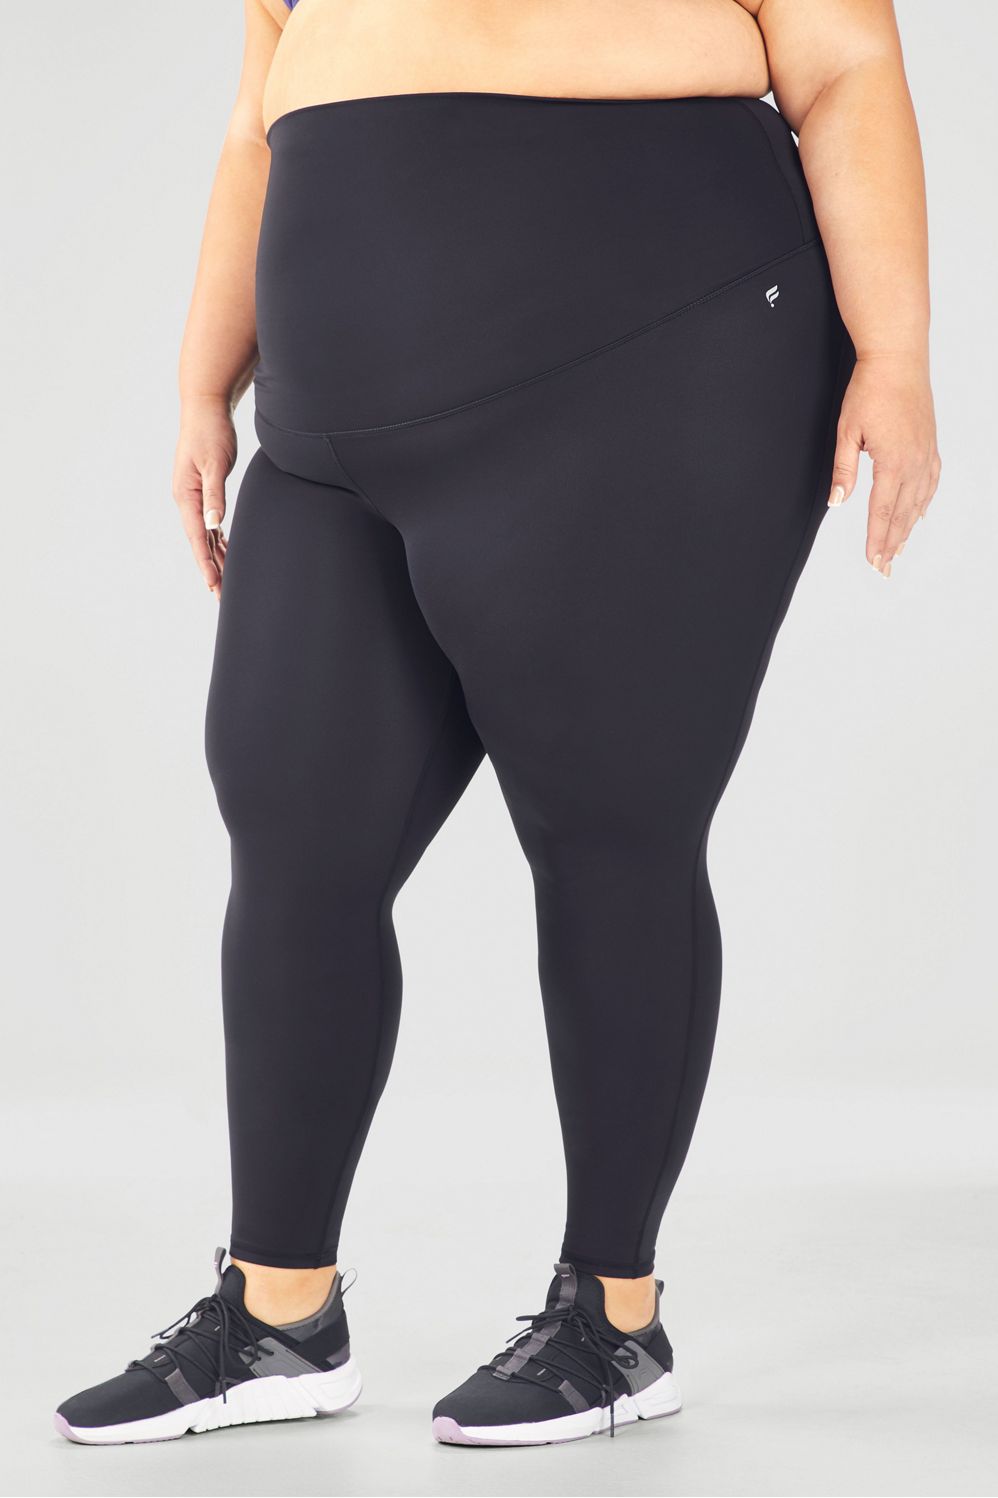 PureLuxe High-Waisted Maternity Legging - - Fabletics Canada